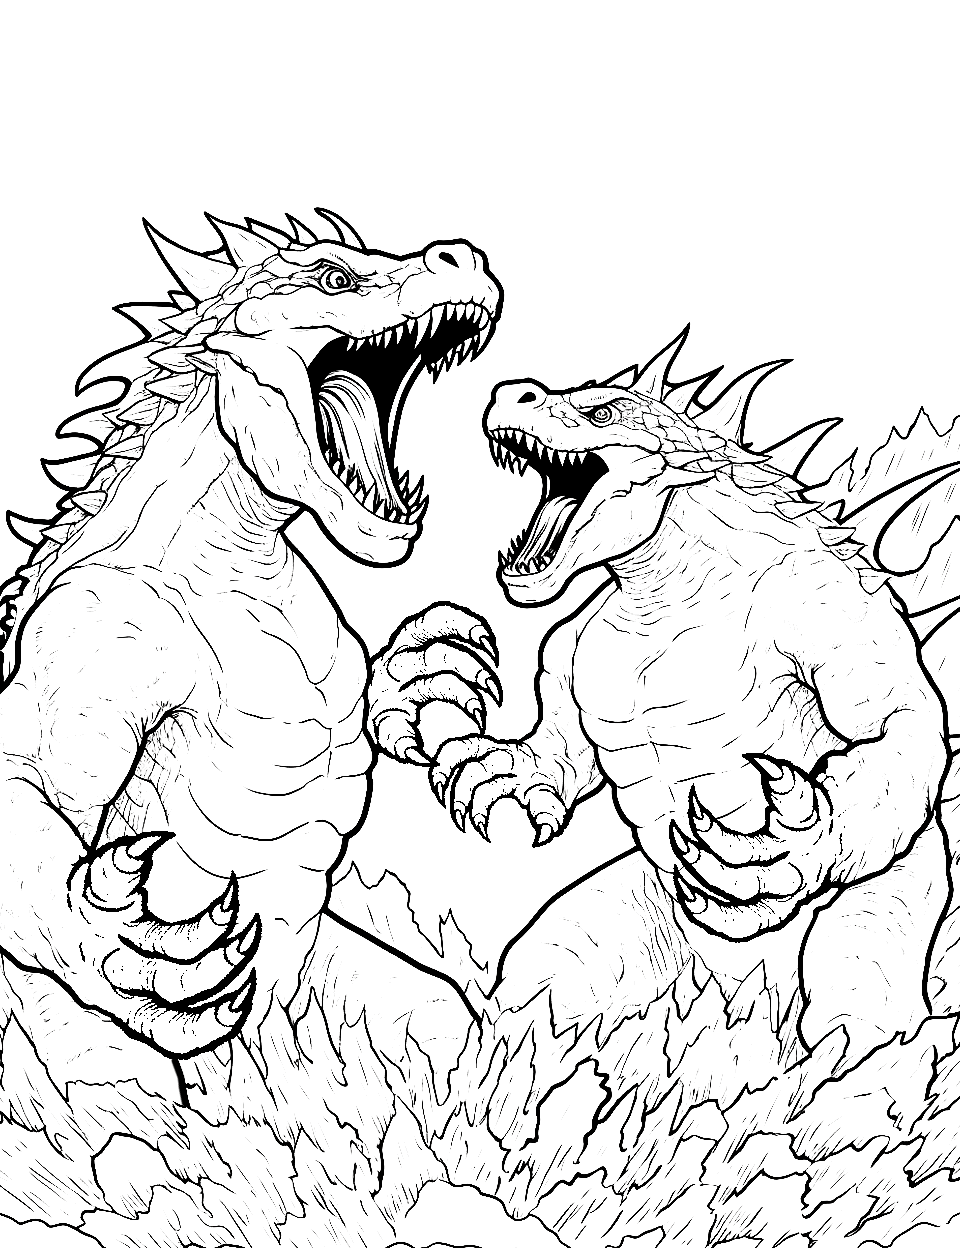 Fiery Fight Coloring Page - Godzilla and another kaiju, engaged in a fierce battle with fiery surroundings.